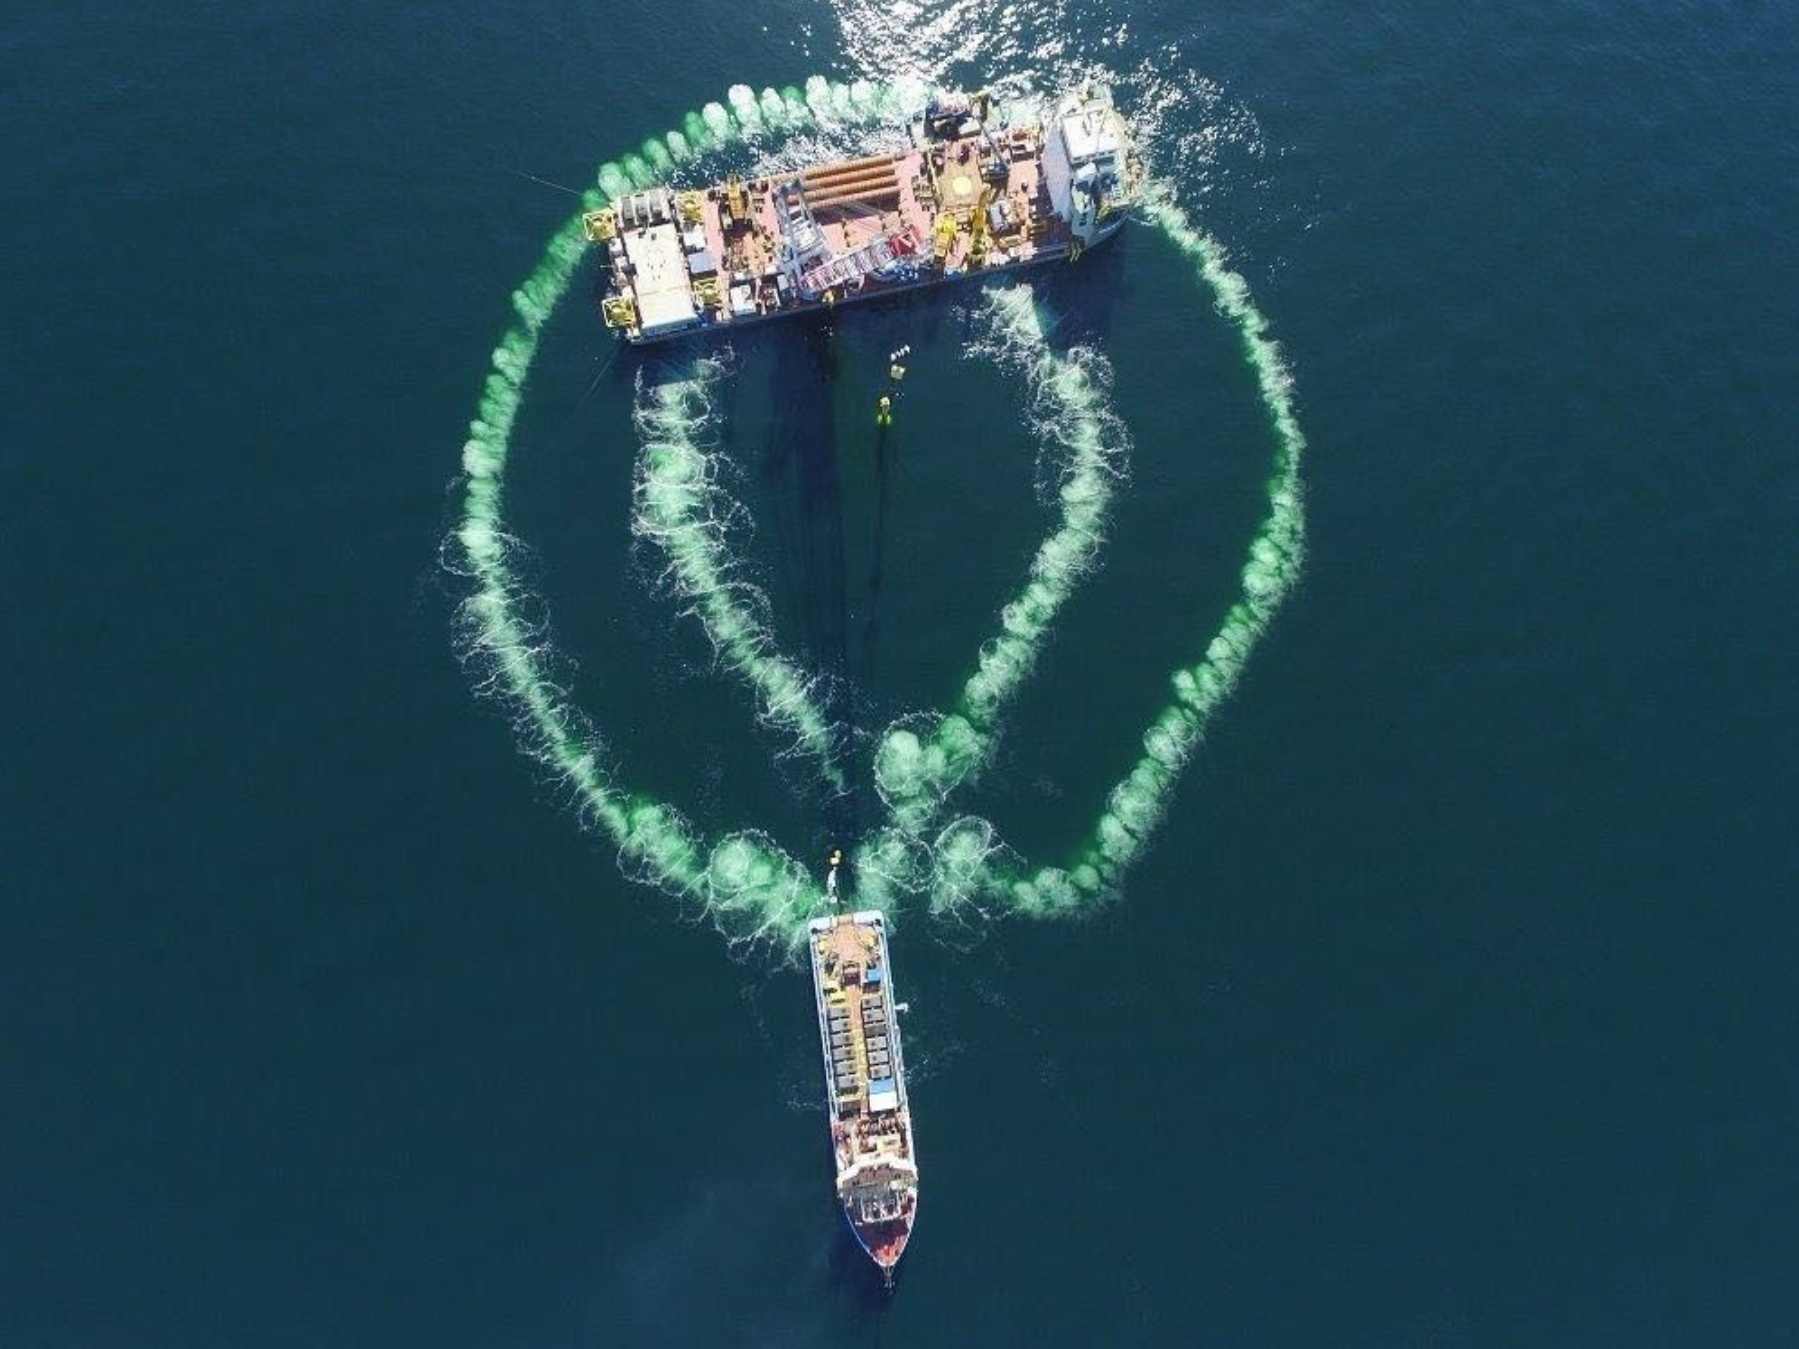 A "bubble curtain" encircles the installation vessel, reducing sound waves in the water, during the construction of the Coastal Virginia Offshore Wind pilot project.